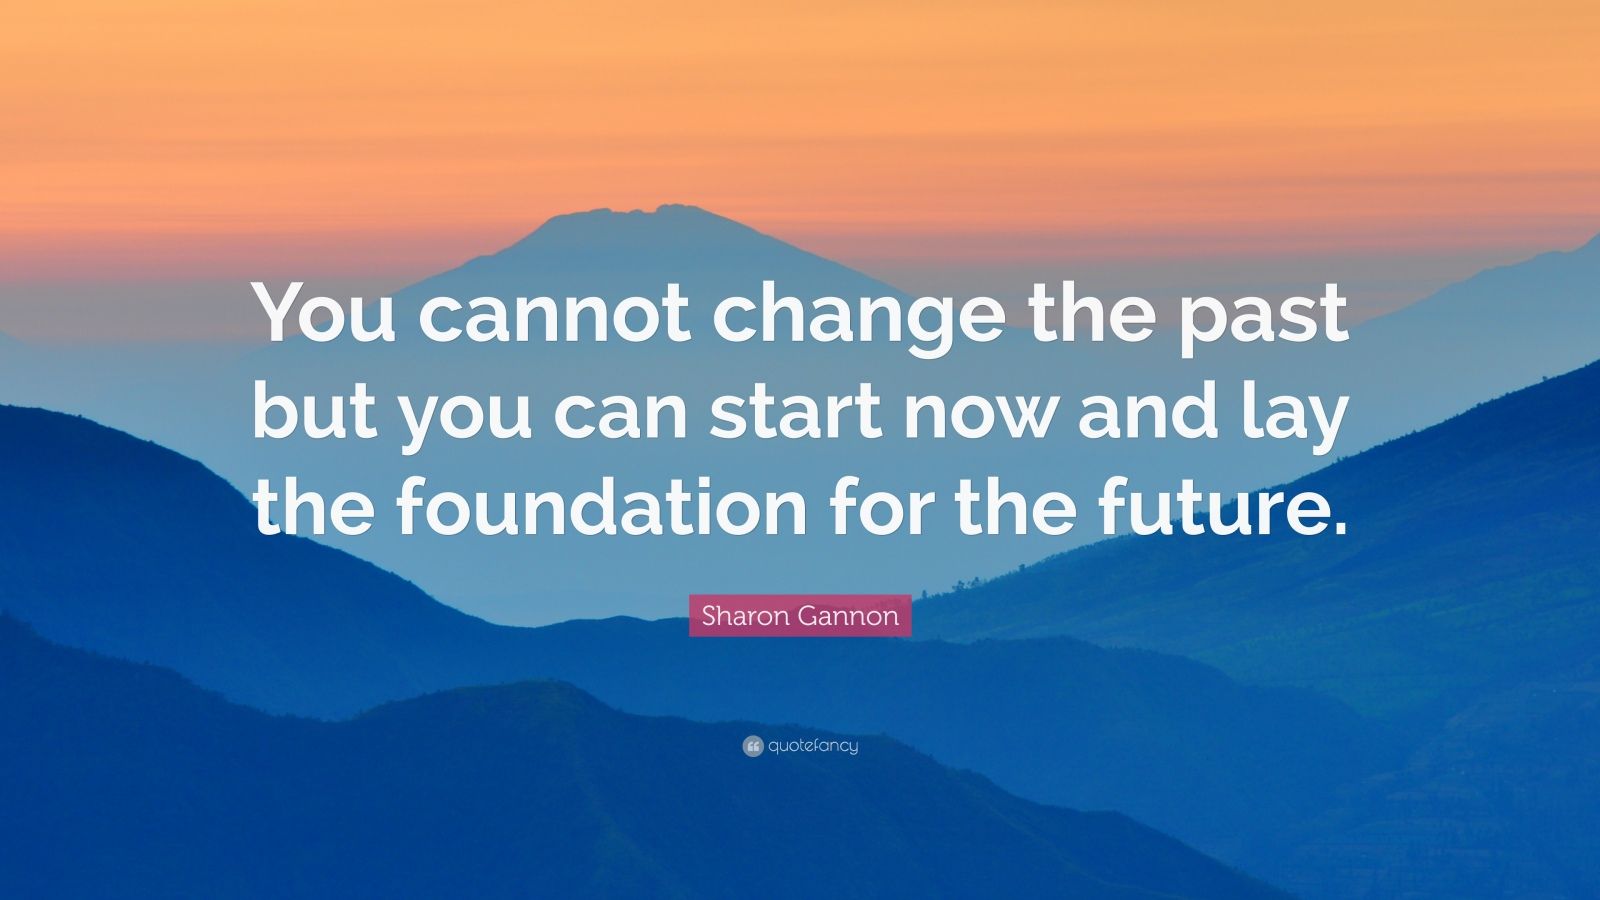 Sharon Gannon Quote: “You cannot change the past but you can start now ...